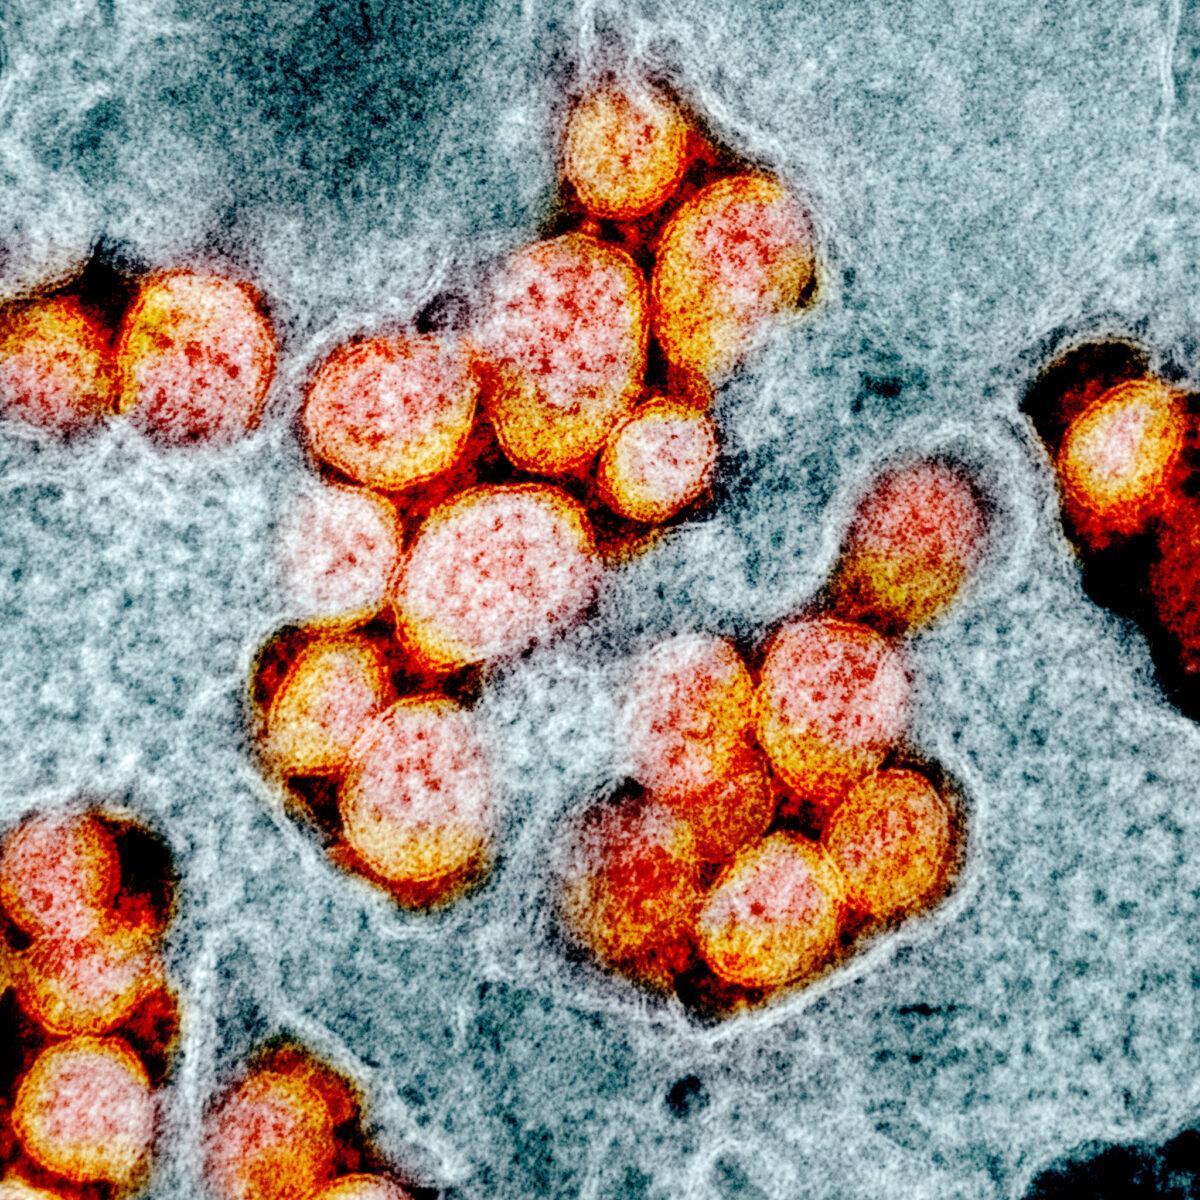 Transmission electron micrograph of SARS-CoV-2 virus particles, isolated from a patient. Image captured and color-enhanced at the NIAID Integrated Research Facility (IRF) in Fort Detrick, Maryland. (NIAID)